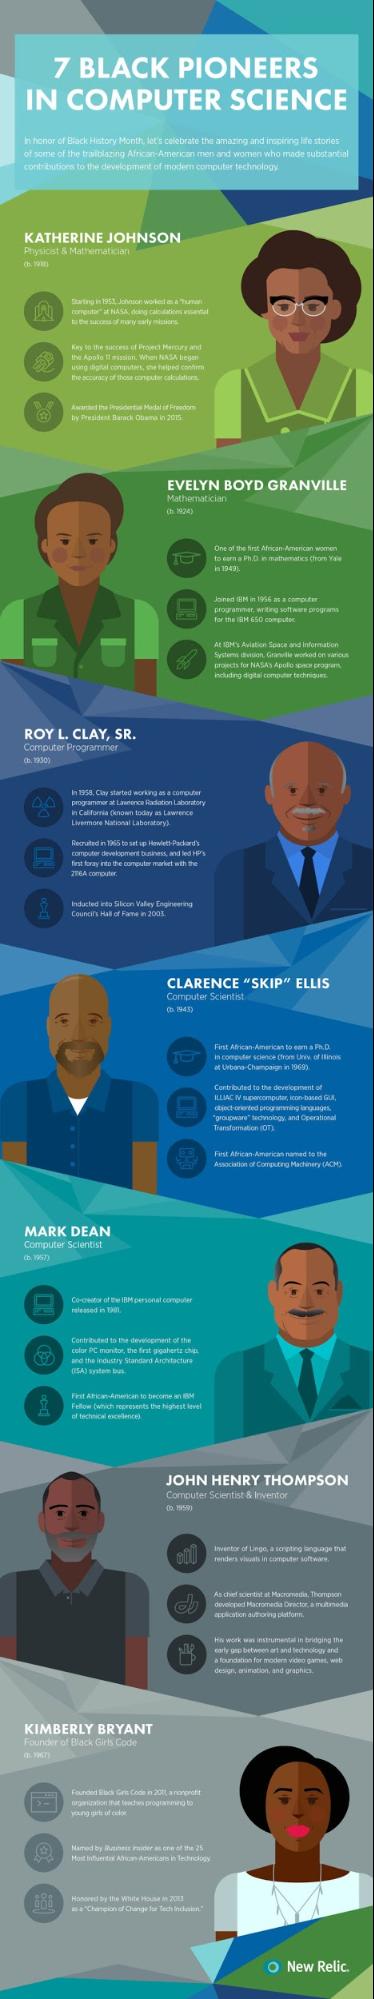 Infographic about 7 Black Pioneers In Computer Science. Shows images and facts about black computer scientists.